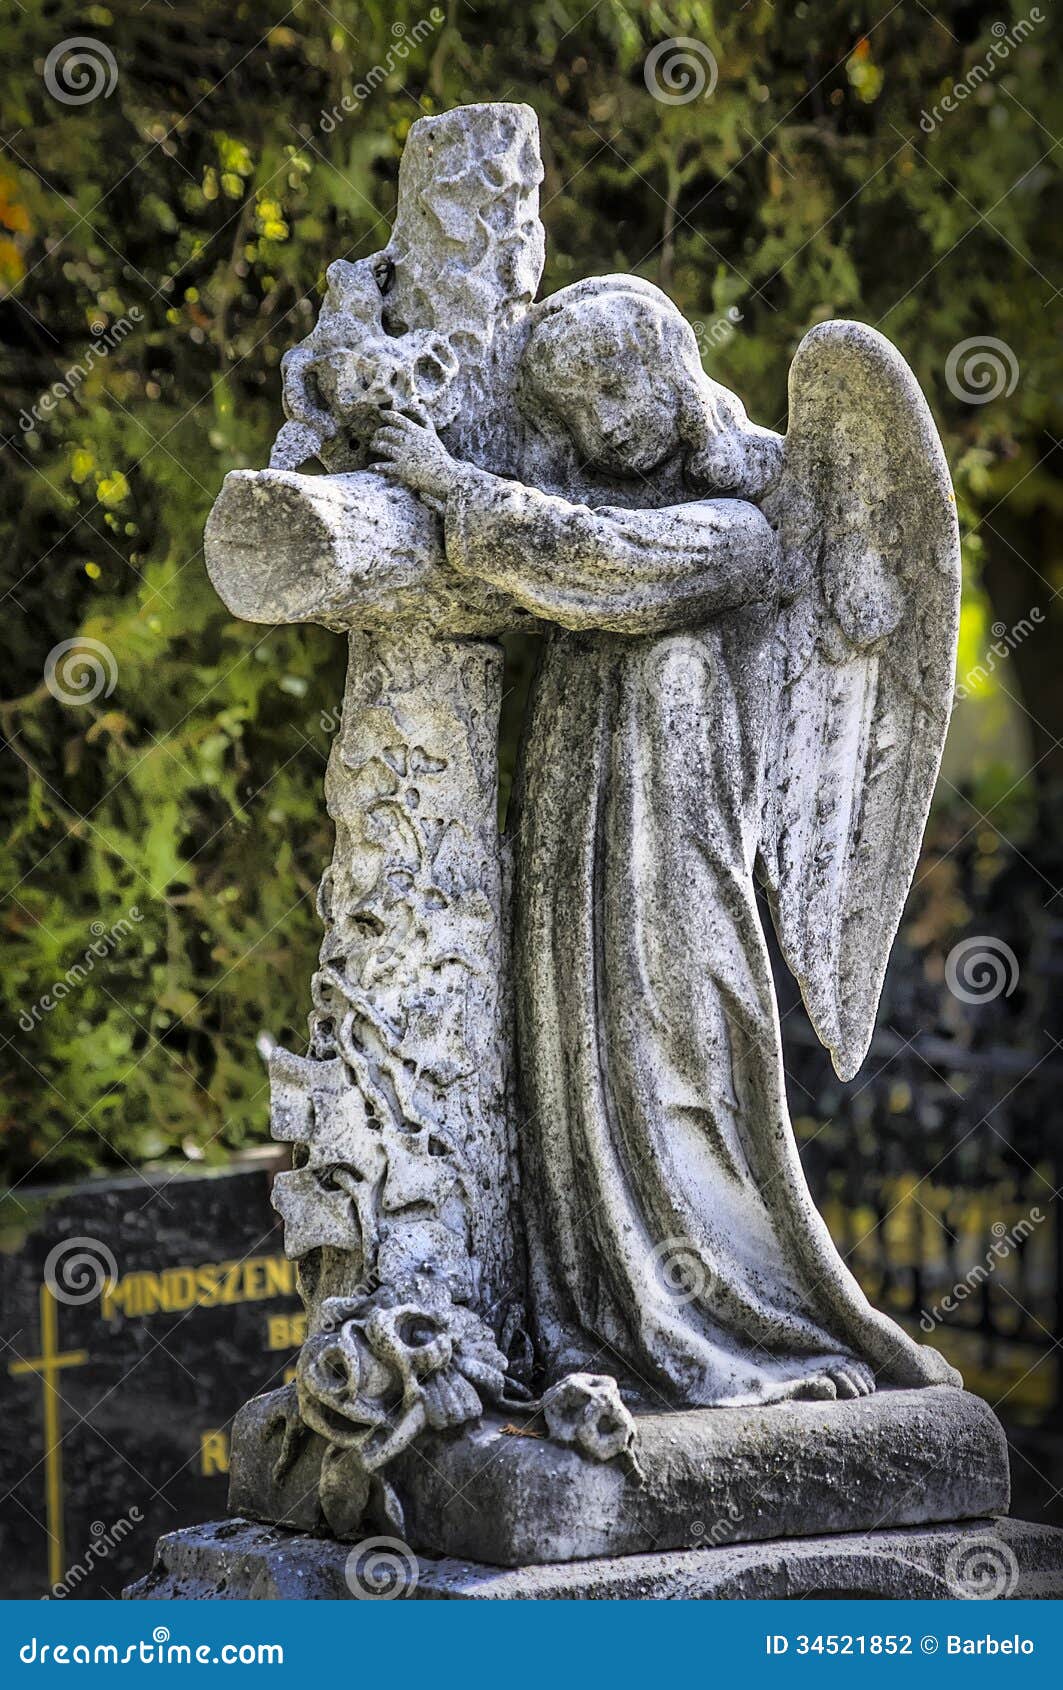 Concrete statue stock photo. Image of churchyard, ancient - 34521852